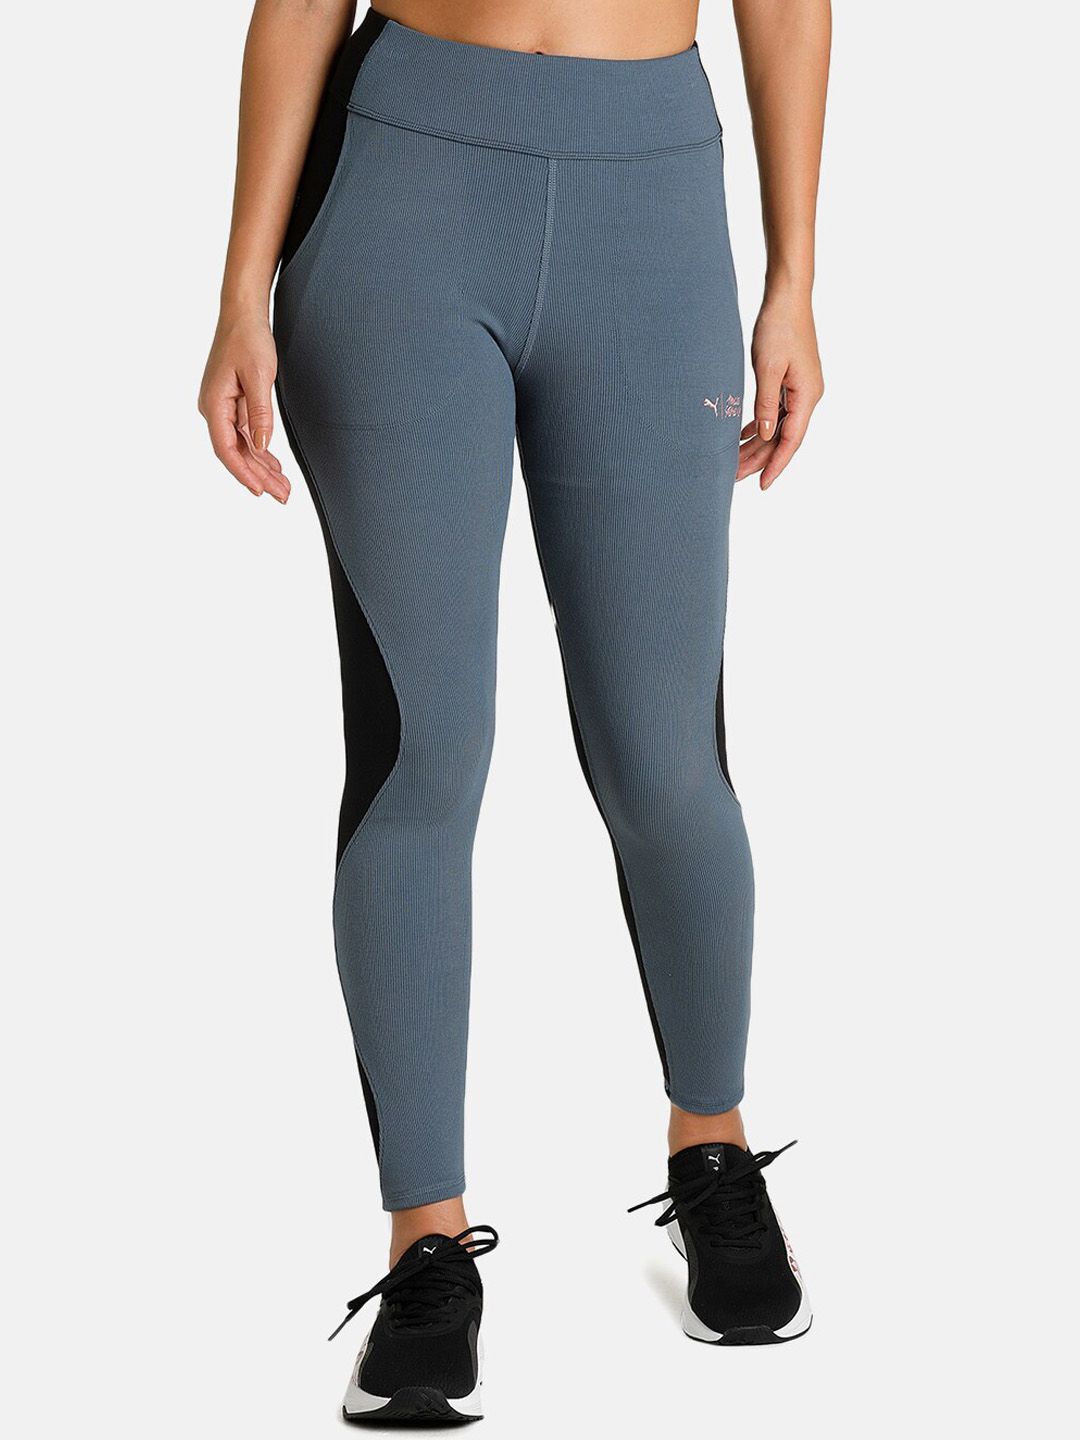 Puma Women Grey Solid  Tights Price in India